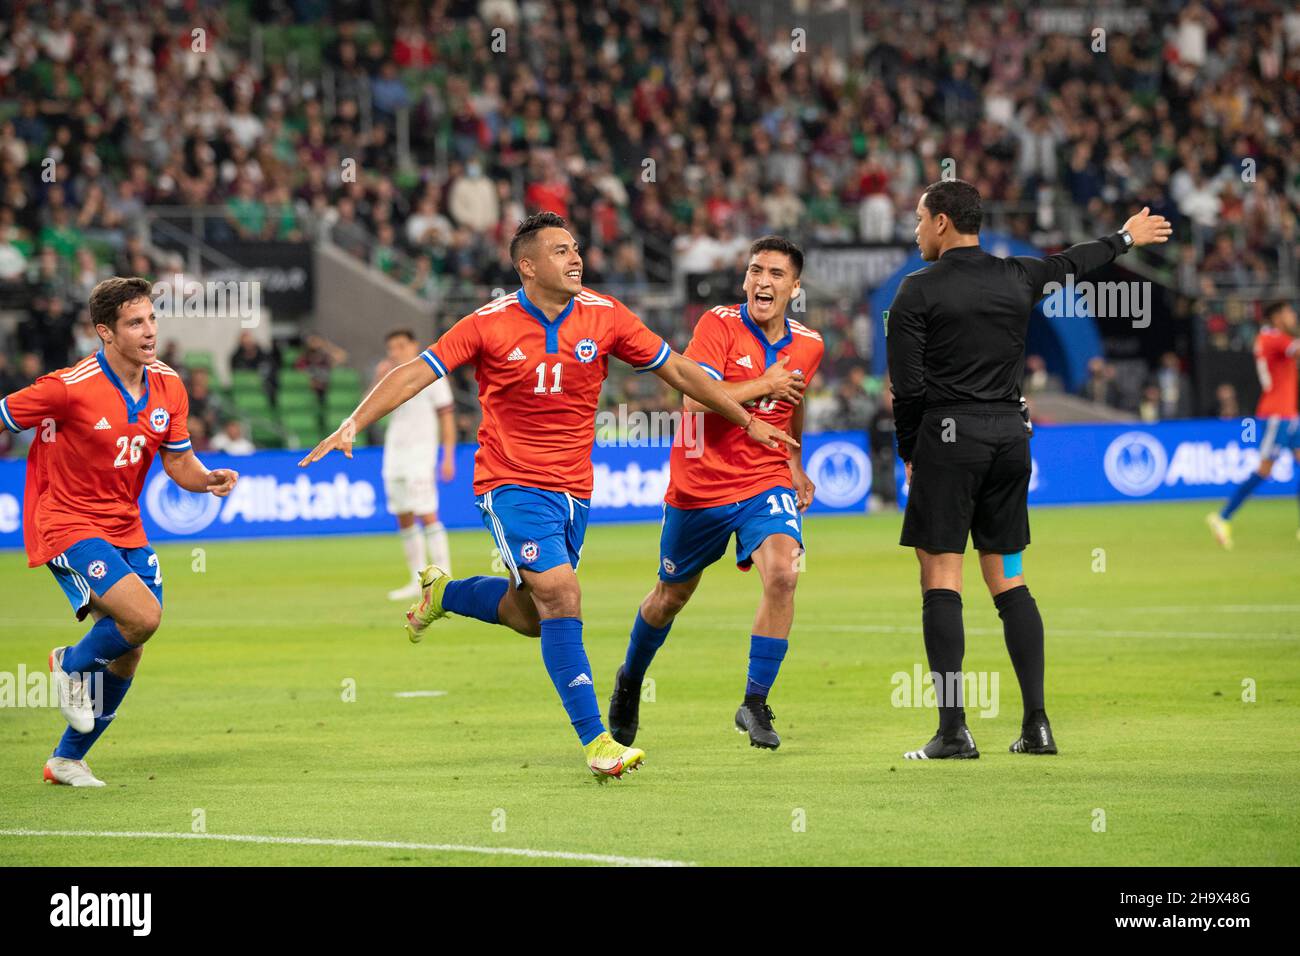 Austin, Texas, USA. 8th December, 2021. Chile's IVAN MORALES (11) is chased by teammates CLEMENTE MONTES (28) and MARCELINO NUNEZ (10) after Morales scores a goal during the first half of a Mexico National Team vs. Chile friendly at Austin's Q2 Stadium. The teams were tied, 2-2 after regulation play. Credit: Bob Daemmrich/Alamy Live News Stock Photo